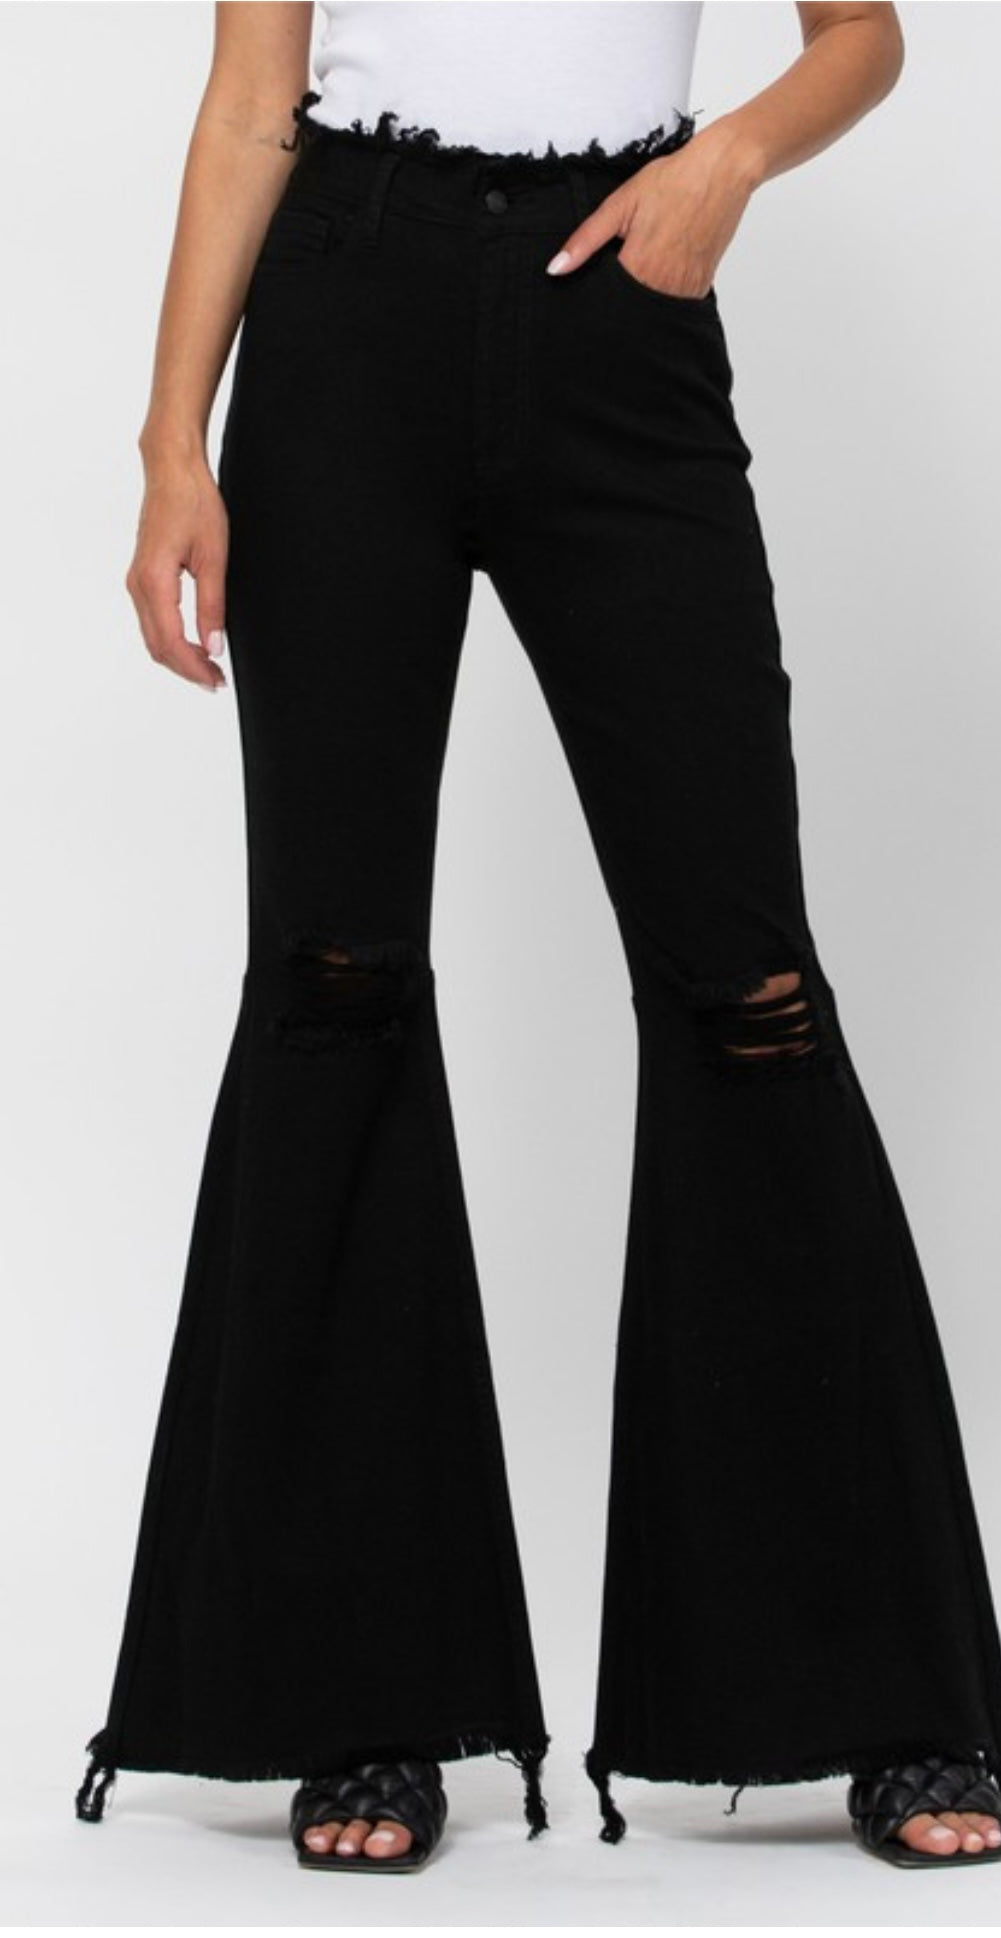 The Bea Black Distressed Flare Jeans